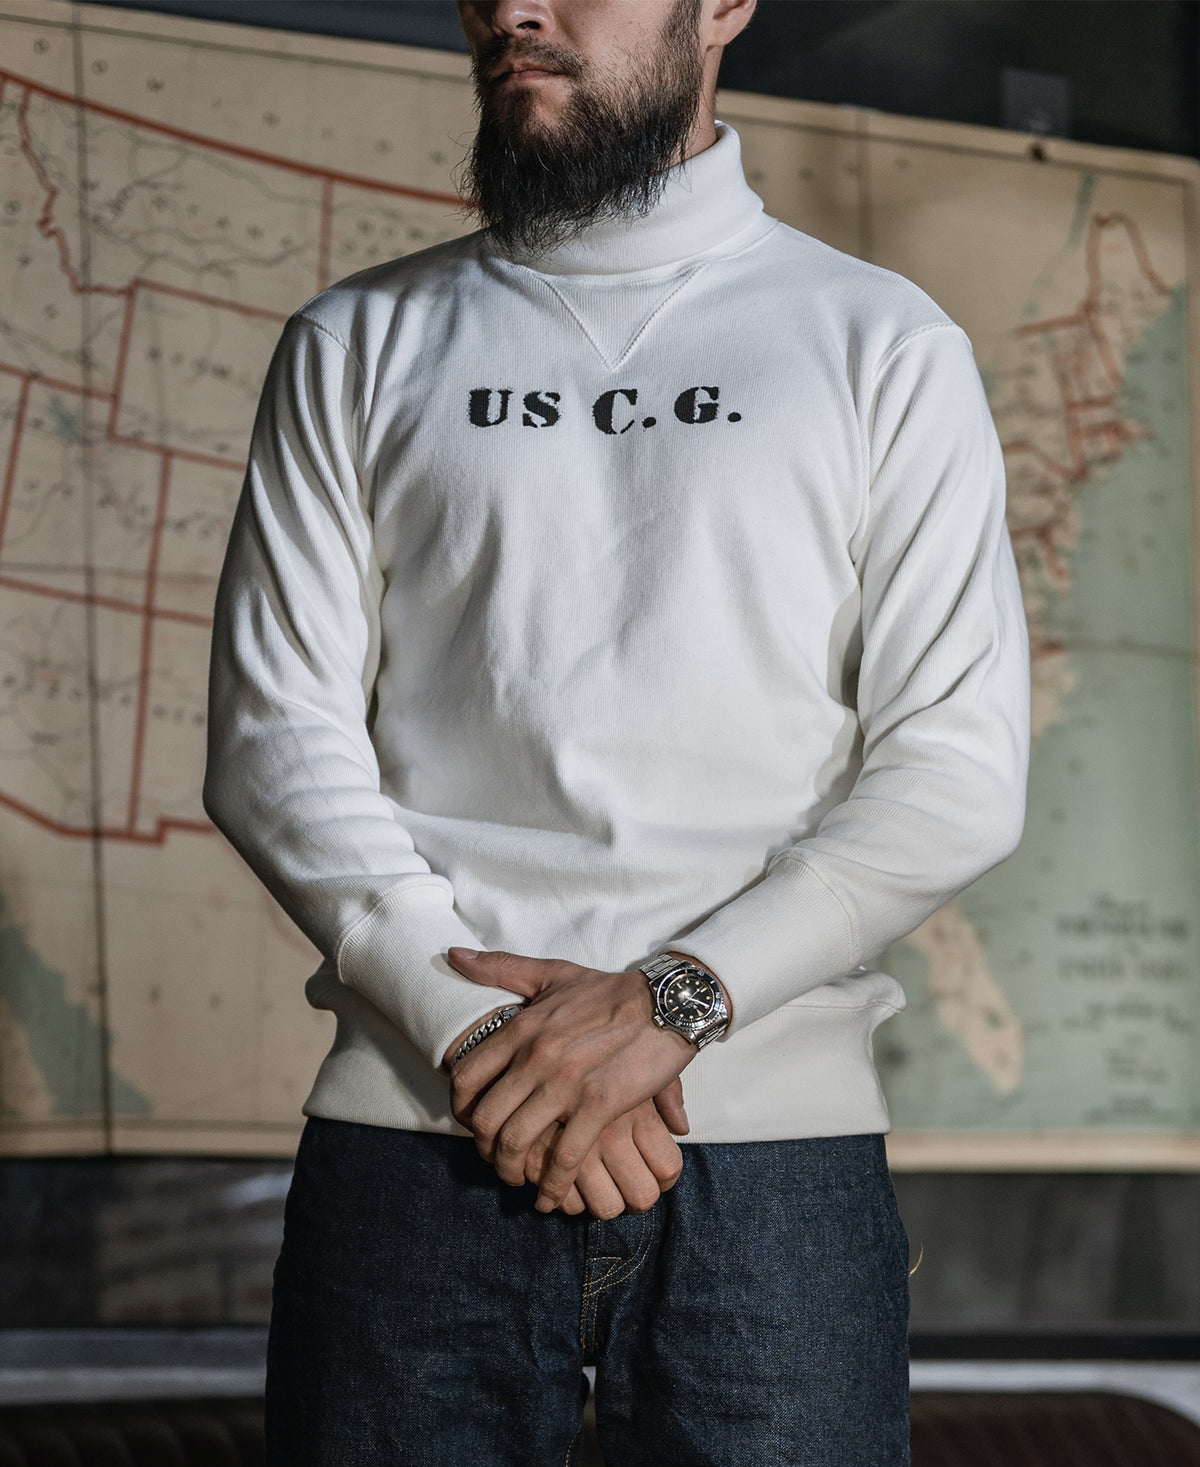 1930s USCG Turtleneck Thermal - White